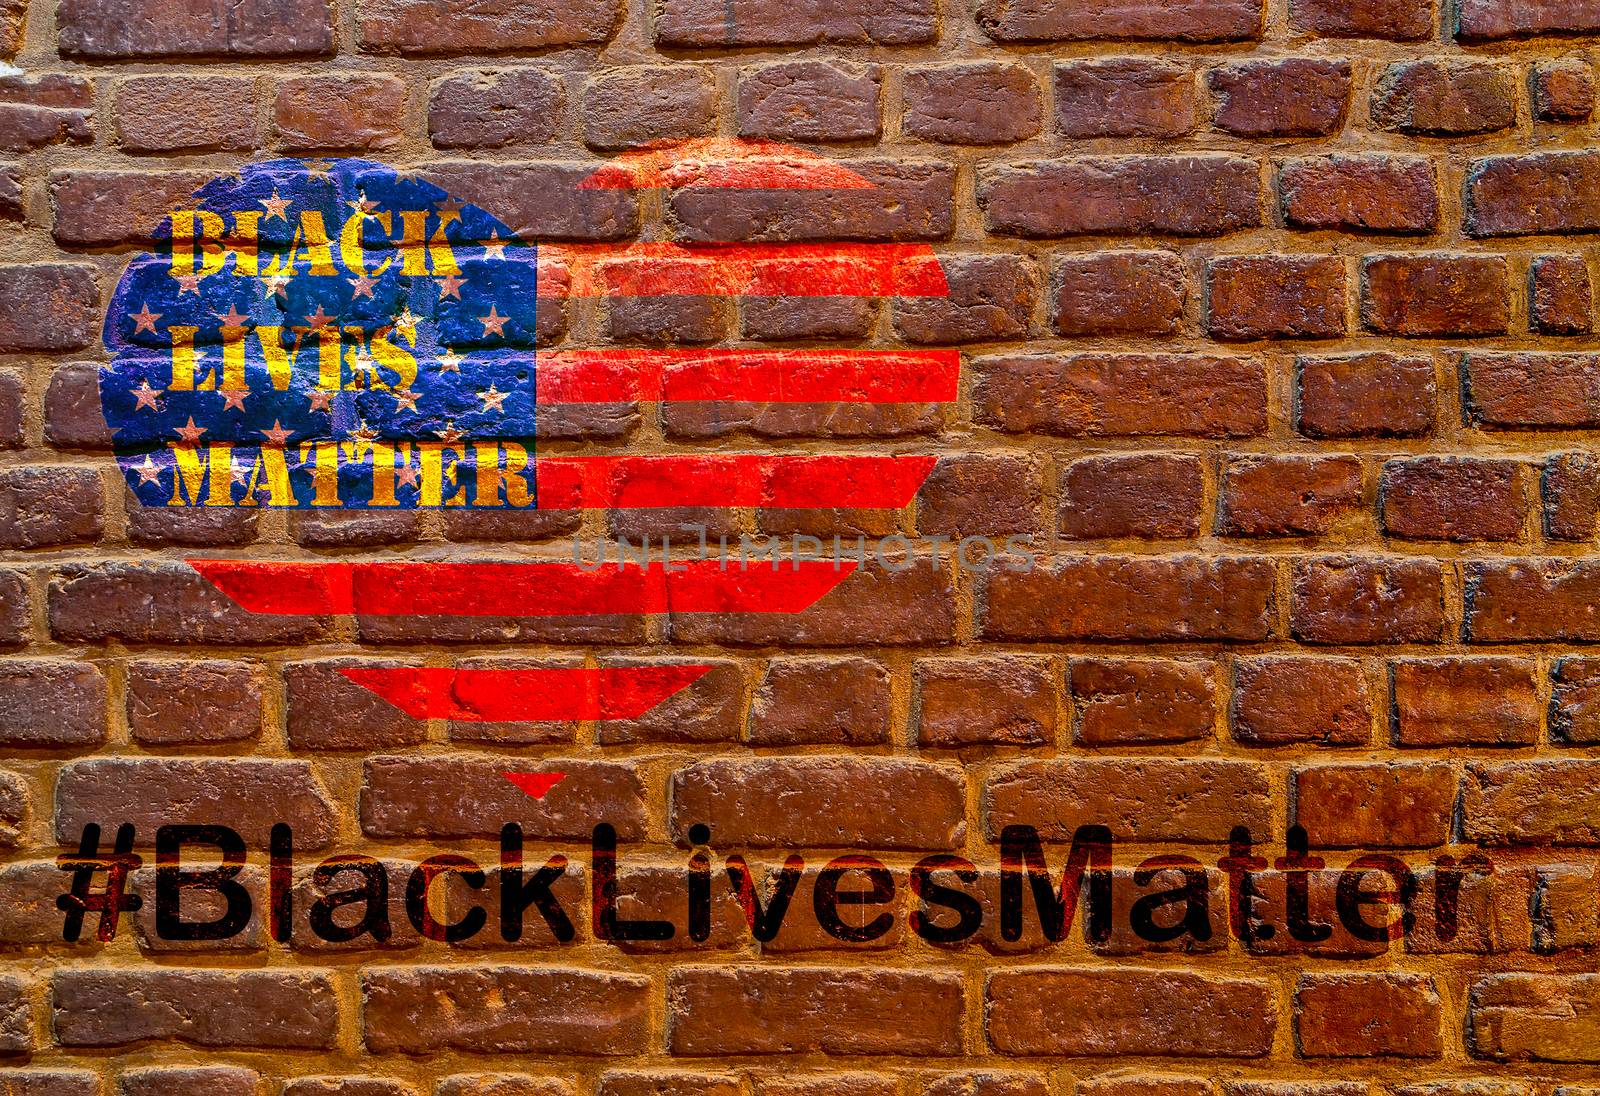 Black Lives Matter hashtag slogan anti Black racism African-American people stencil heart on American flag brick wall background texture stone